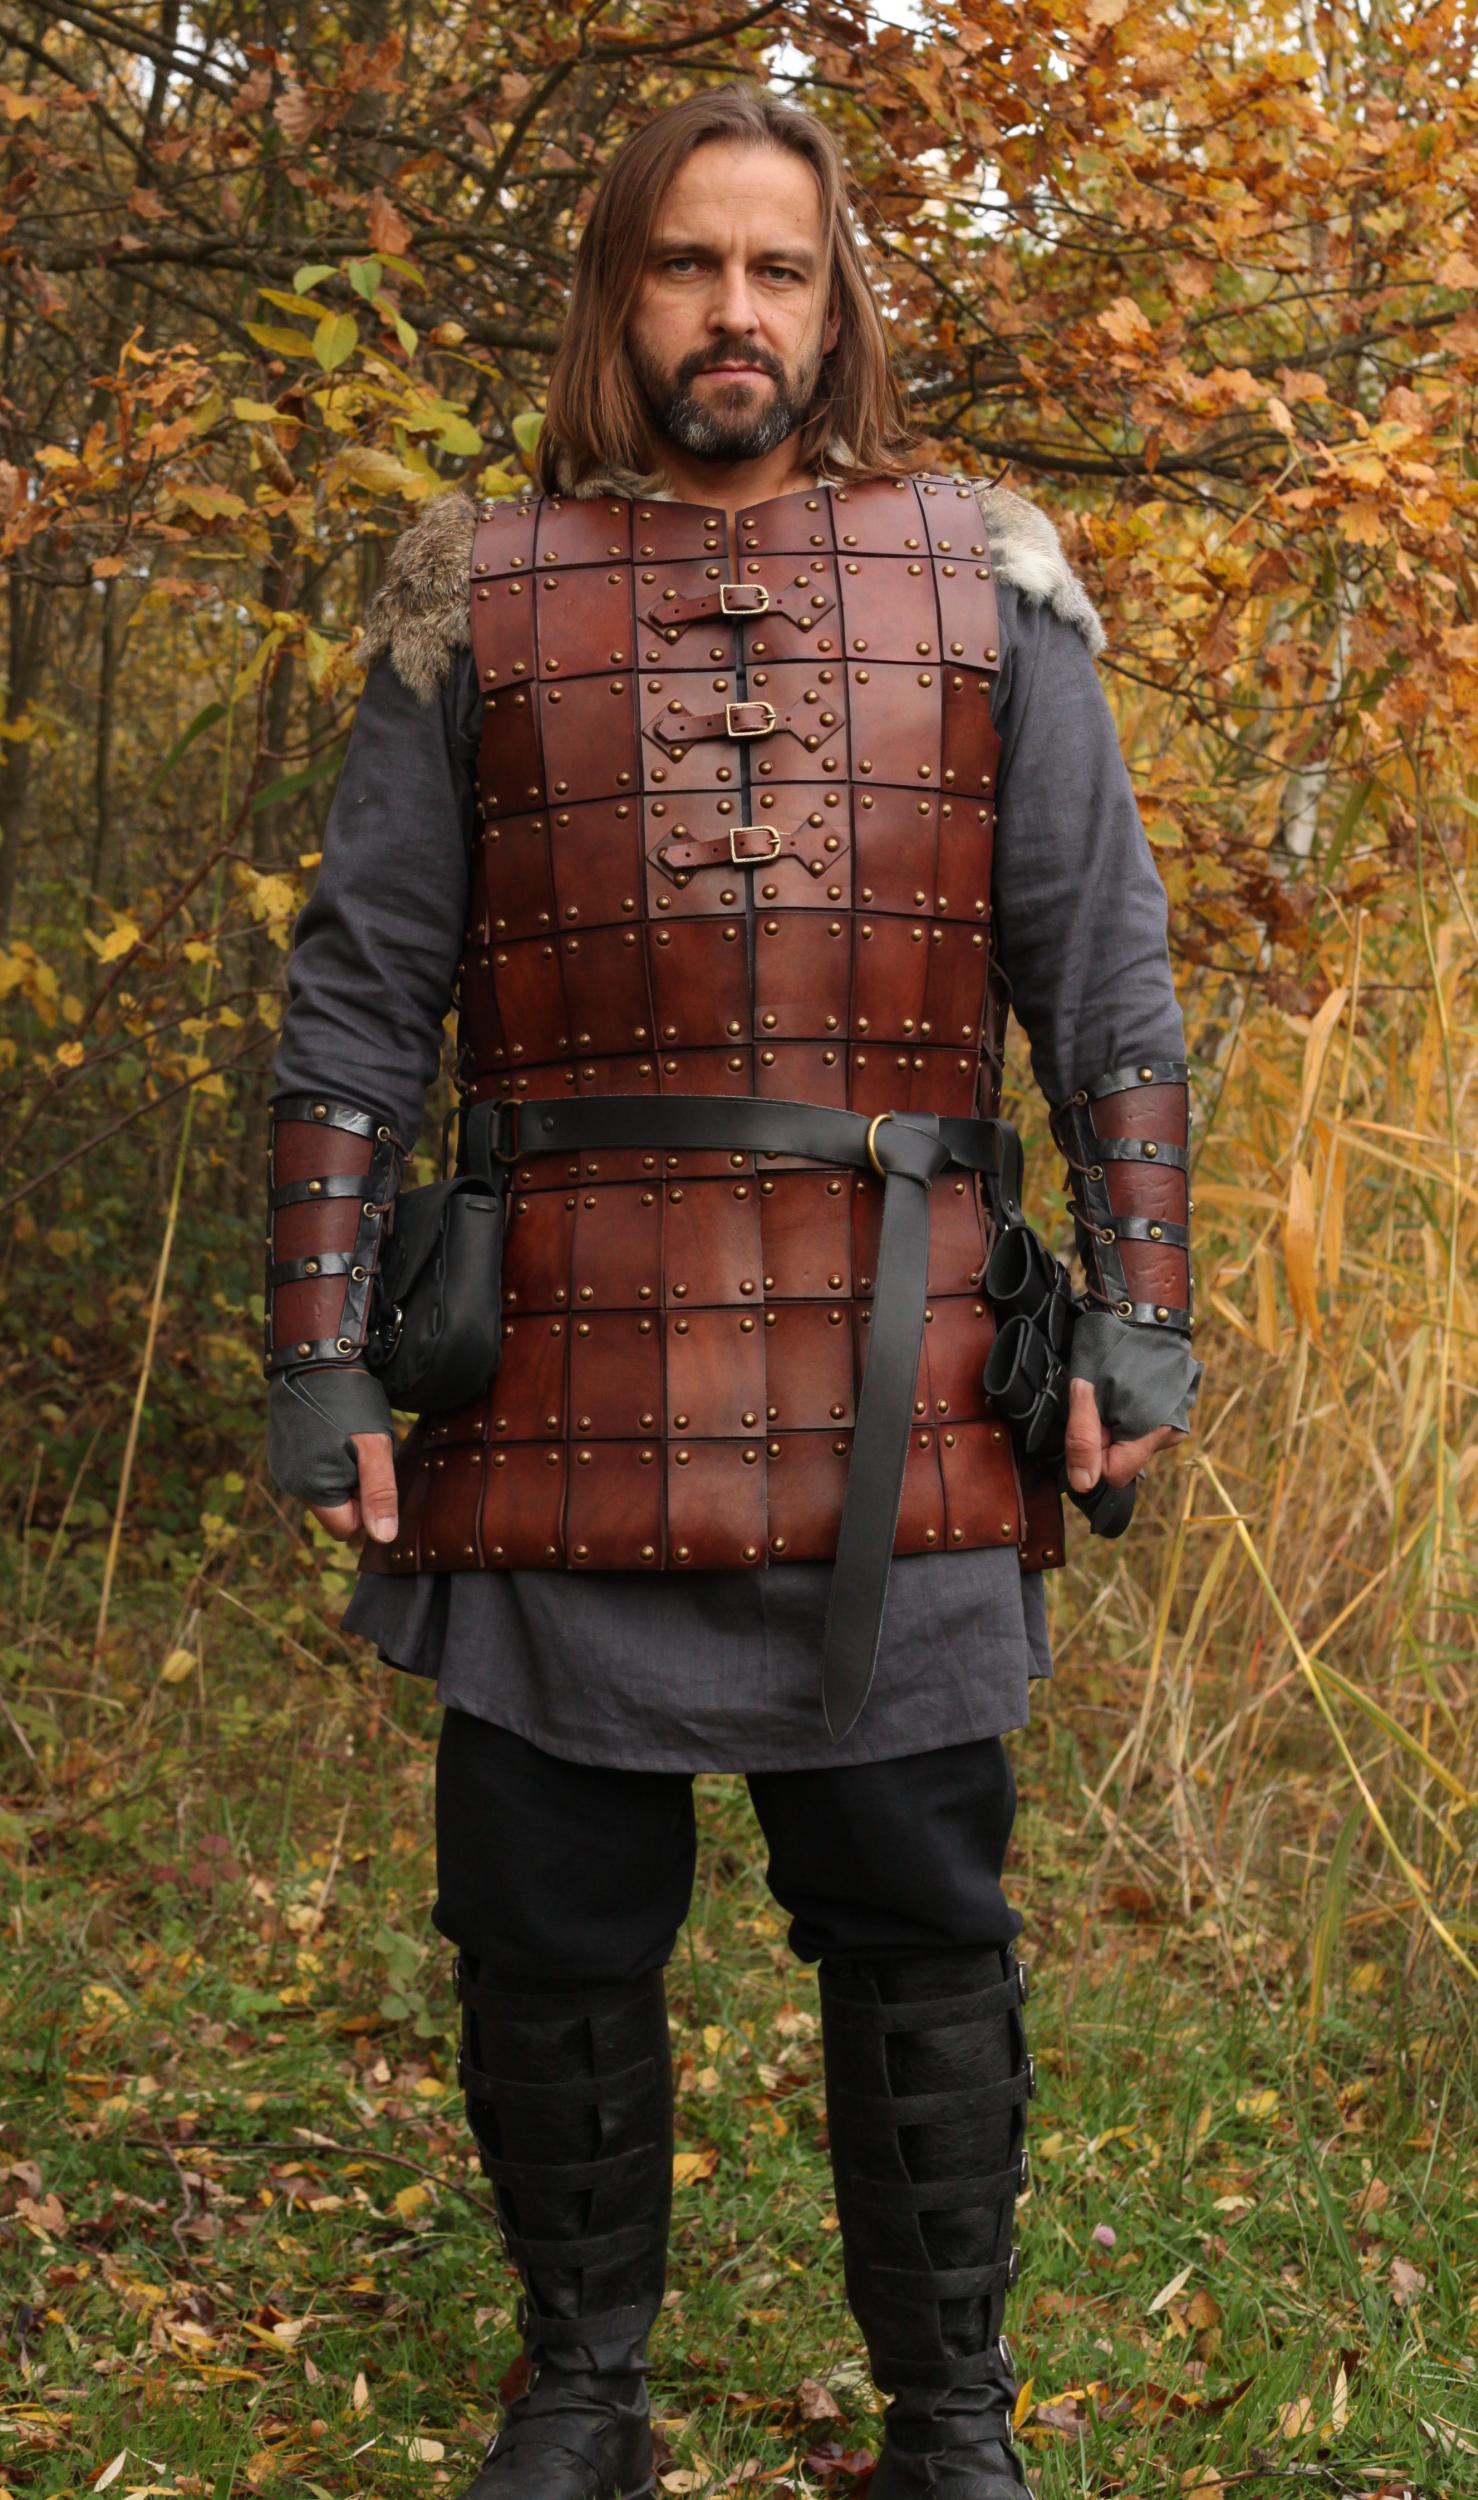 leather plate armor